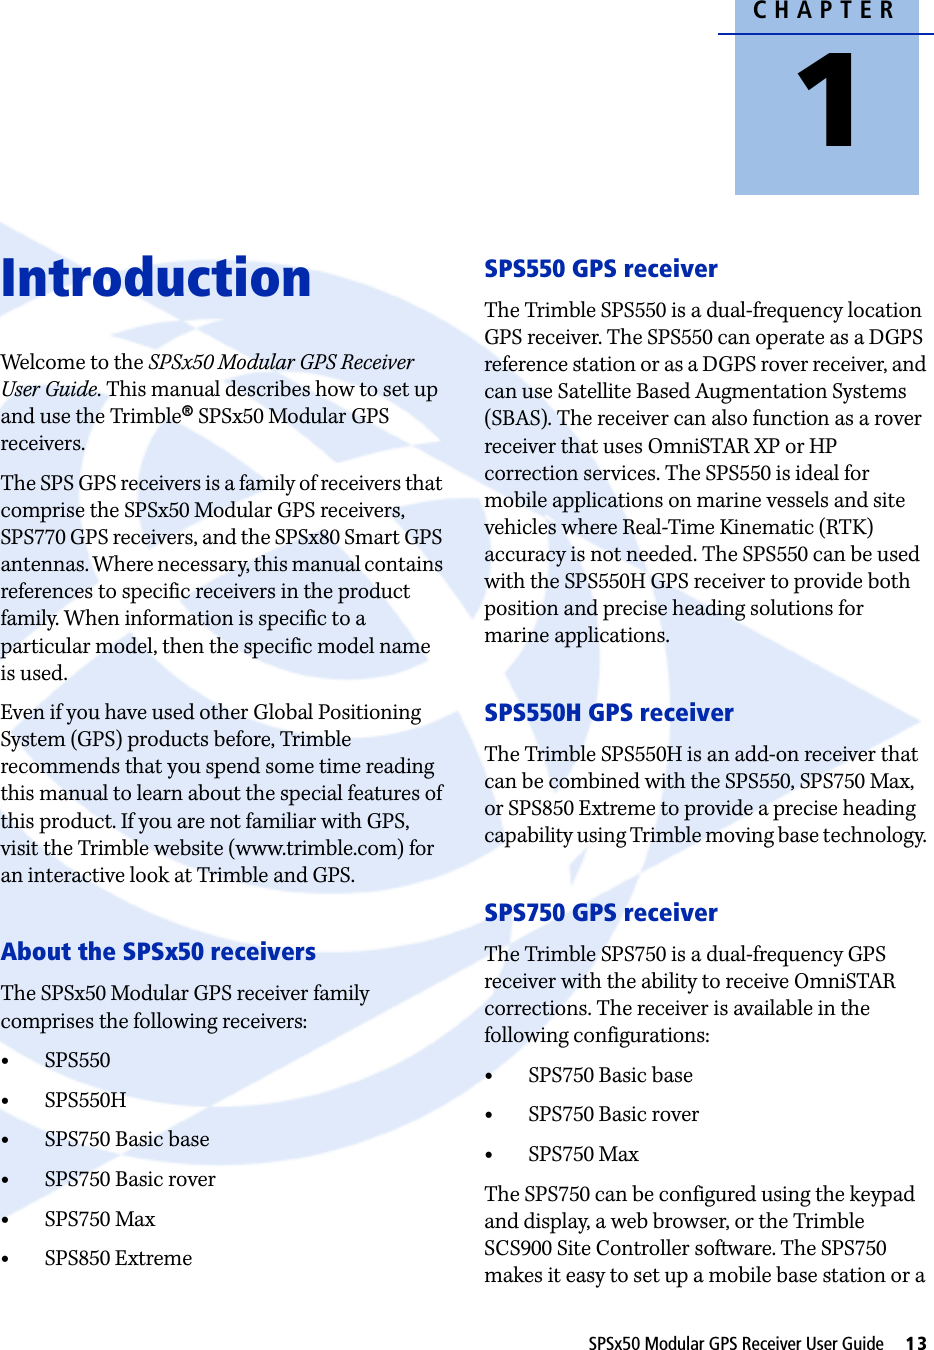 CHAPTER1SPSx50 Modular GPS Receiver User Guide     13Introduction 1Welcome to the SPSx50 Modular GPS Receiver User Guide. This manual describes how to set up and use the Trimble® SPSx50 Modular GPS receivers. The SPS GPS receivers is a family of receivers that comprise the SPSx50 Modular GPS receivers, SPS770 GPS receivers, and the SPSx80 Smart GPS antennas. Where necessary, this manual contains references to specific receivers in the product family. When information is specific to a particular model, then the specific model name is used. Even if you have used other Global Positioning System (GPS) products before, Trimble recommends that you spend some time reading this manual to learn about the special features of this product. If you are not familiar with GPS, visit the Trimble website (www.trimble.com) for an interactive look at Trimble and GPS.About the SPSx50 receiversThe SPSx50 Modular GPS receiver family comprises the following receivers:•SPS550•SPS550H•SPS750 Basic base•SPS750 Basic rover•SPS750 Max•SPS850 ExtremeSPS550 GPS receiverThe Trimble SPS550 is a dual-frequency location GPS receiver. The SPS550 can operate as a DGPS reference station or as a DGPS rover receiver, and can use Satellite Based Augmentation Systems (SBAS). The receiver can also function as a rover receiver that uses OmniSTAR XP or HP correction services. The SPS550 is ideal for mobile applications on marine vessels and site vehicles where Real-Time Kinematic (RTK) accuracy is not needed. The SPS550 can be used with the SPS550H GPS receiver to provide both position and precise heading solutions for marine applications.SPS550H GPS receiverThe Trimble SPS550H is an add-on receiver that can be combined with the SPS550, SPS750 Max, or SPS850 Extreme to provide a precise heading capability using Trimble moving base technology. SPS750 GPS receiverThe Trimble SPS750 is a dual-frequency GPS receiver with the ability to receive OmniSTAR corrections. The receiver is available in the following configurations:•SPS750 Basic base•SPS750 Basic rover•SPS750 MaxThe SPS750 can be configured using the keypad and display, a web browser, or the Trimble SCS900 Site Controller software. The SPS750 makes it easy to set up a mobile base station or a 